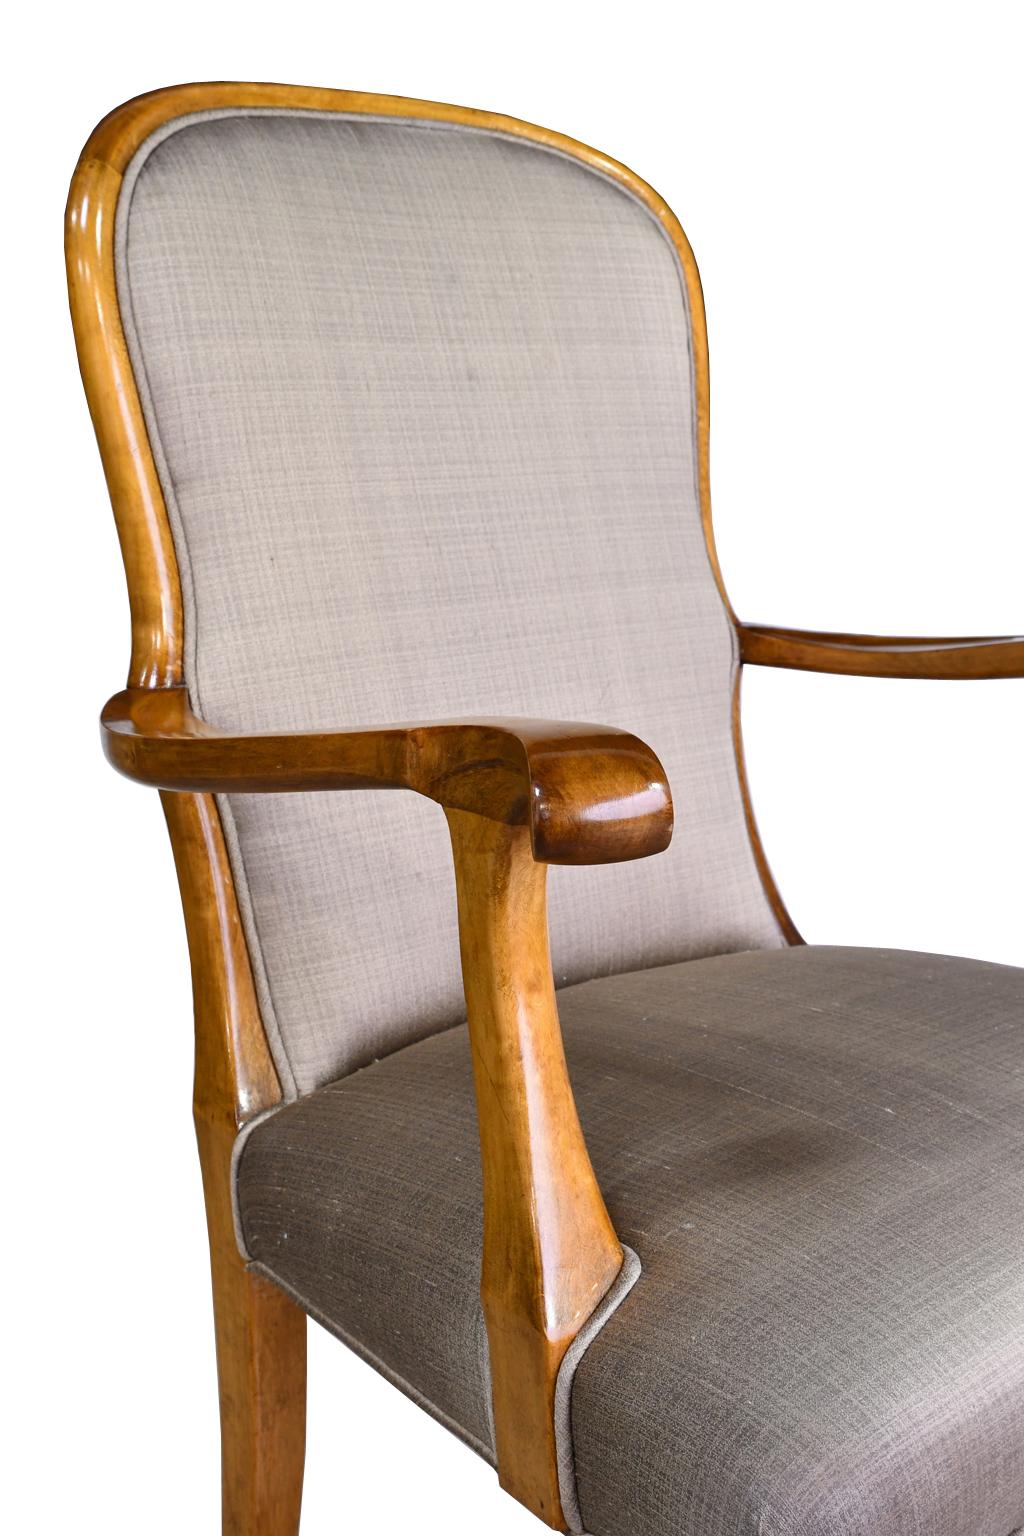 Set of 12 Dining Chairs in Birch with Upholstery, Nordiska Companiet circa 1930 12